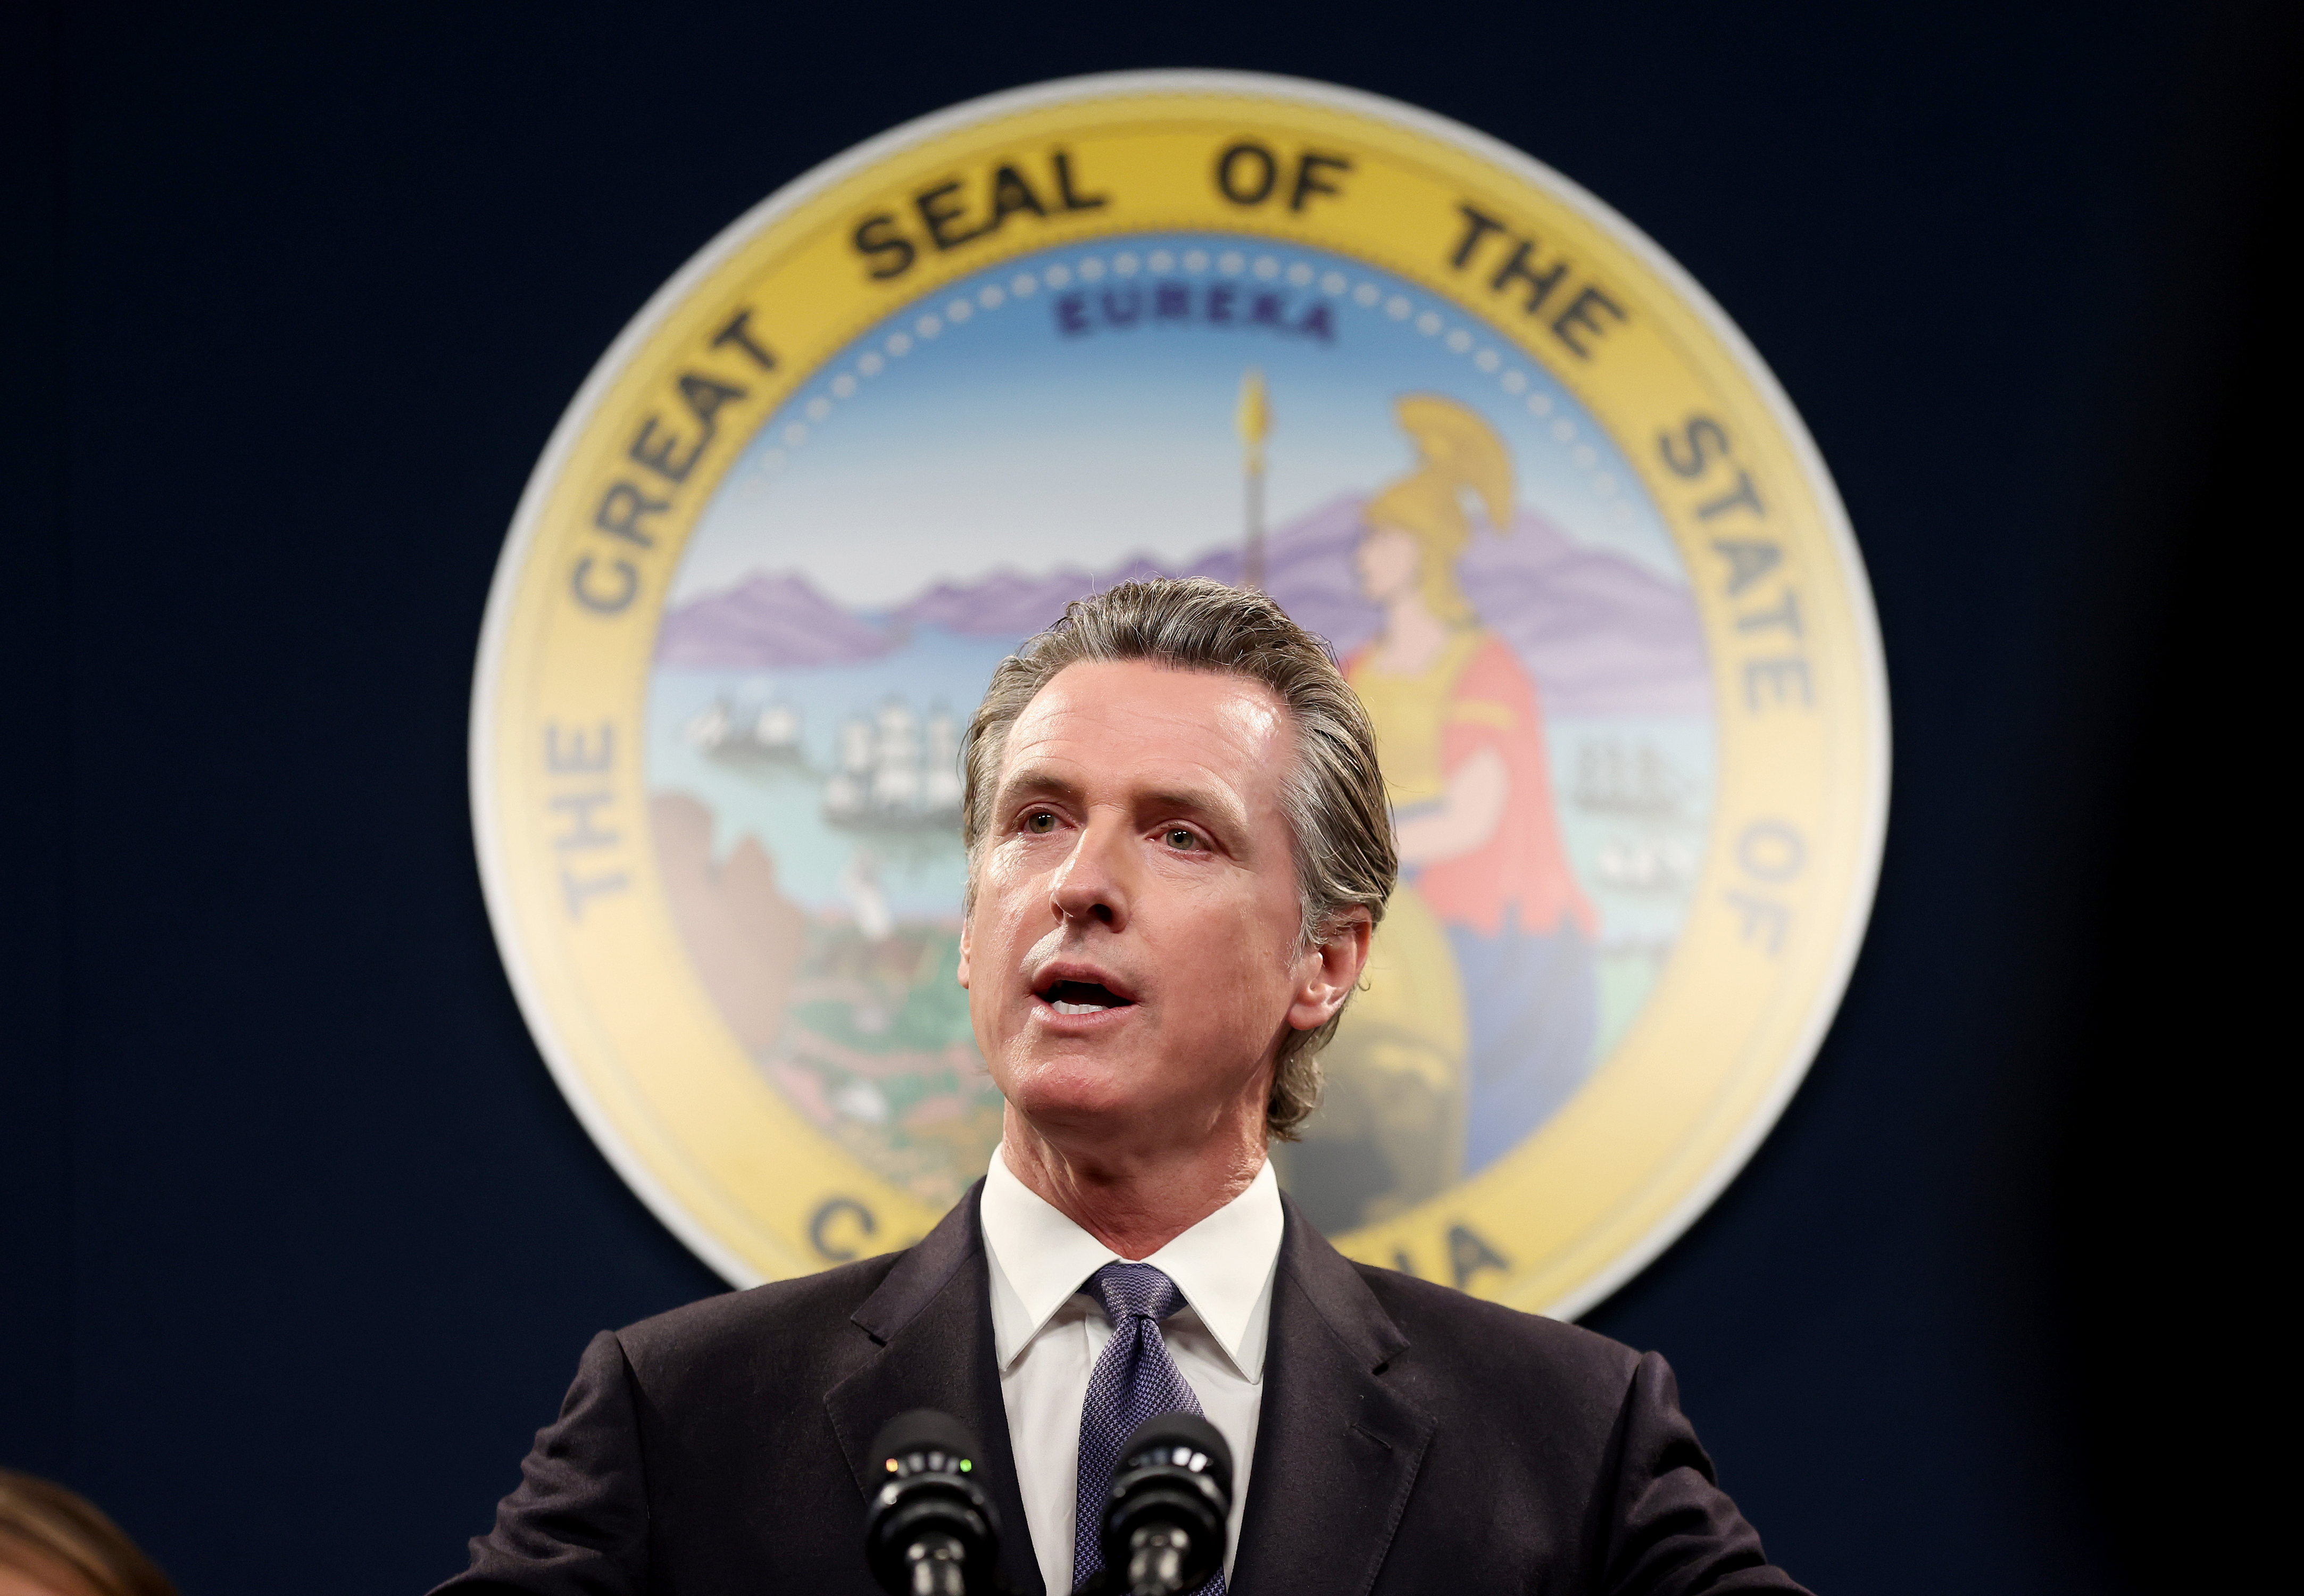 Governor Newsom's surprise meeting with China's leader